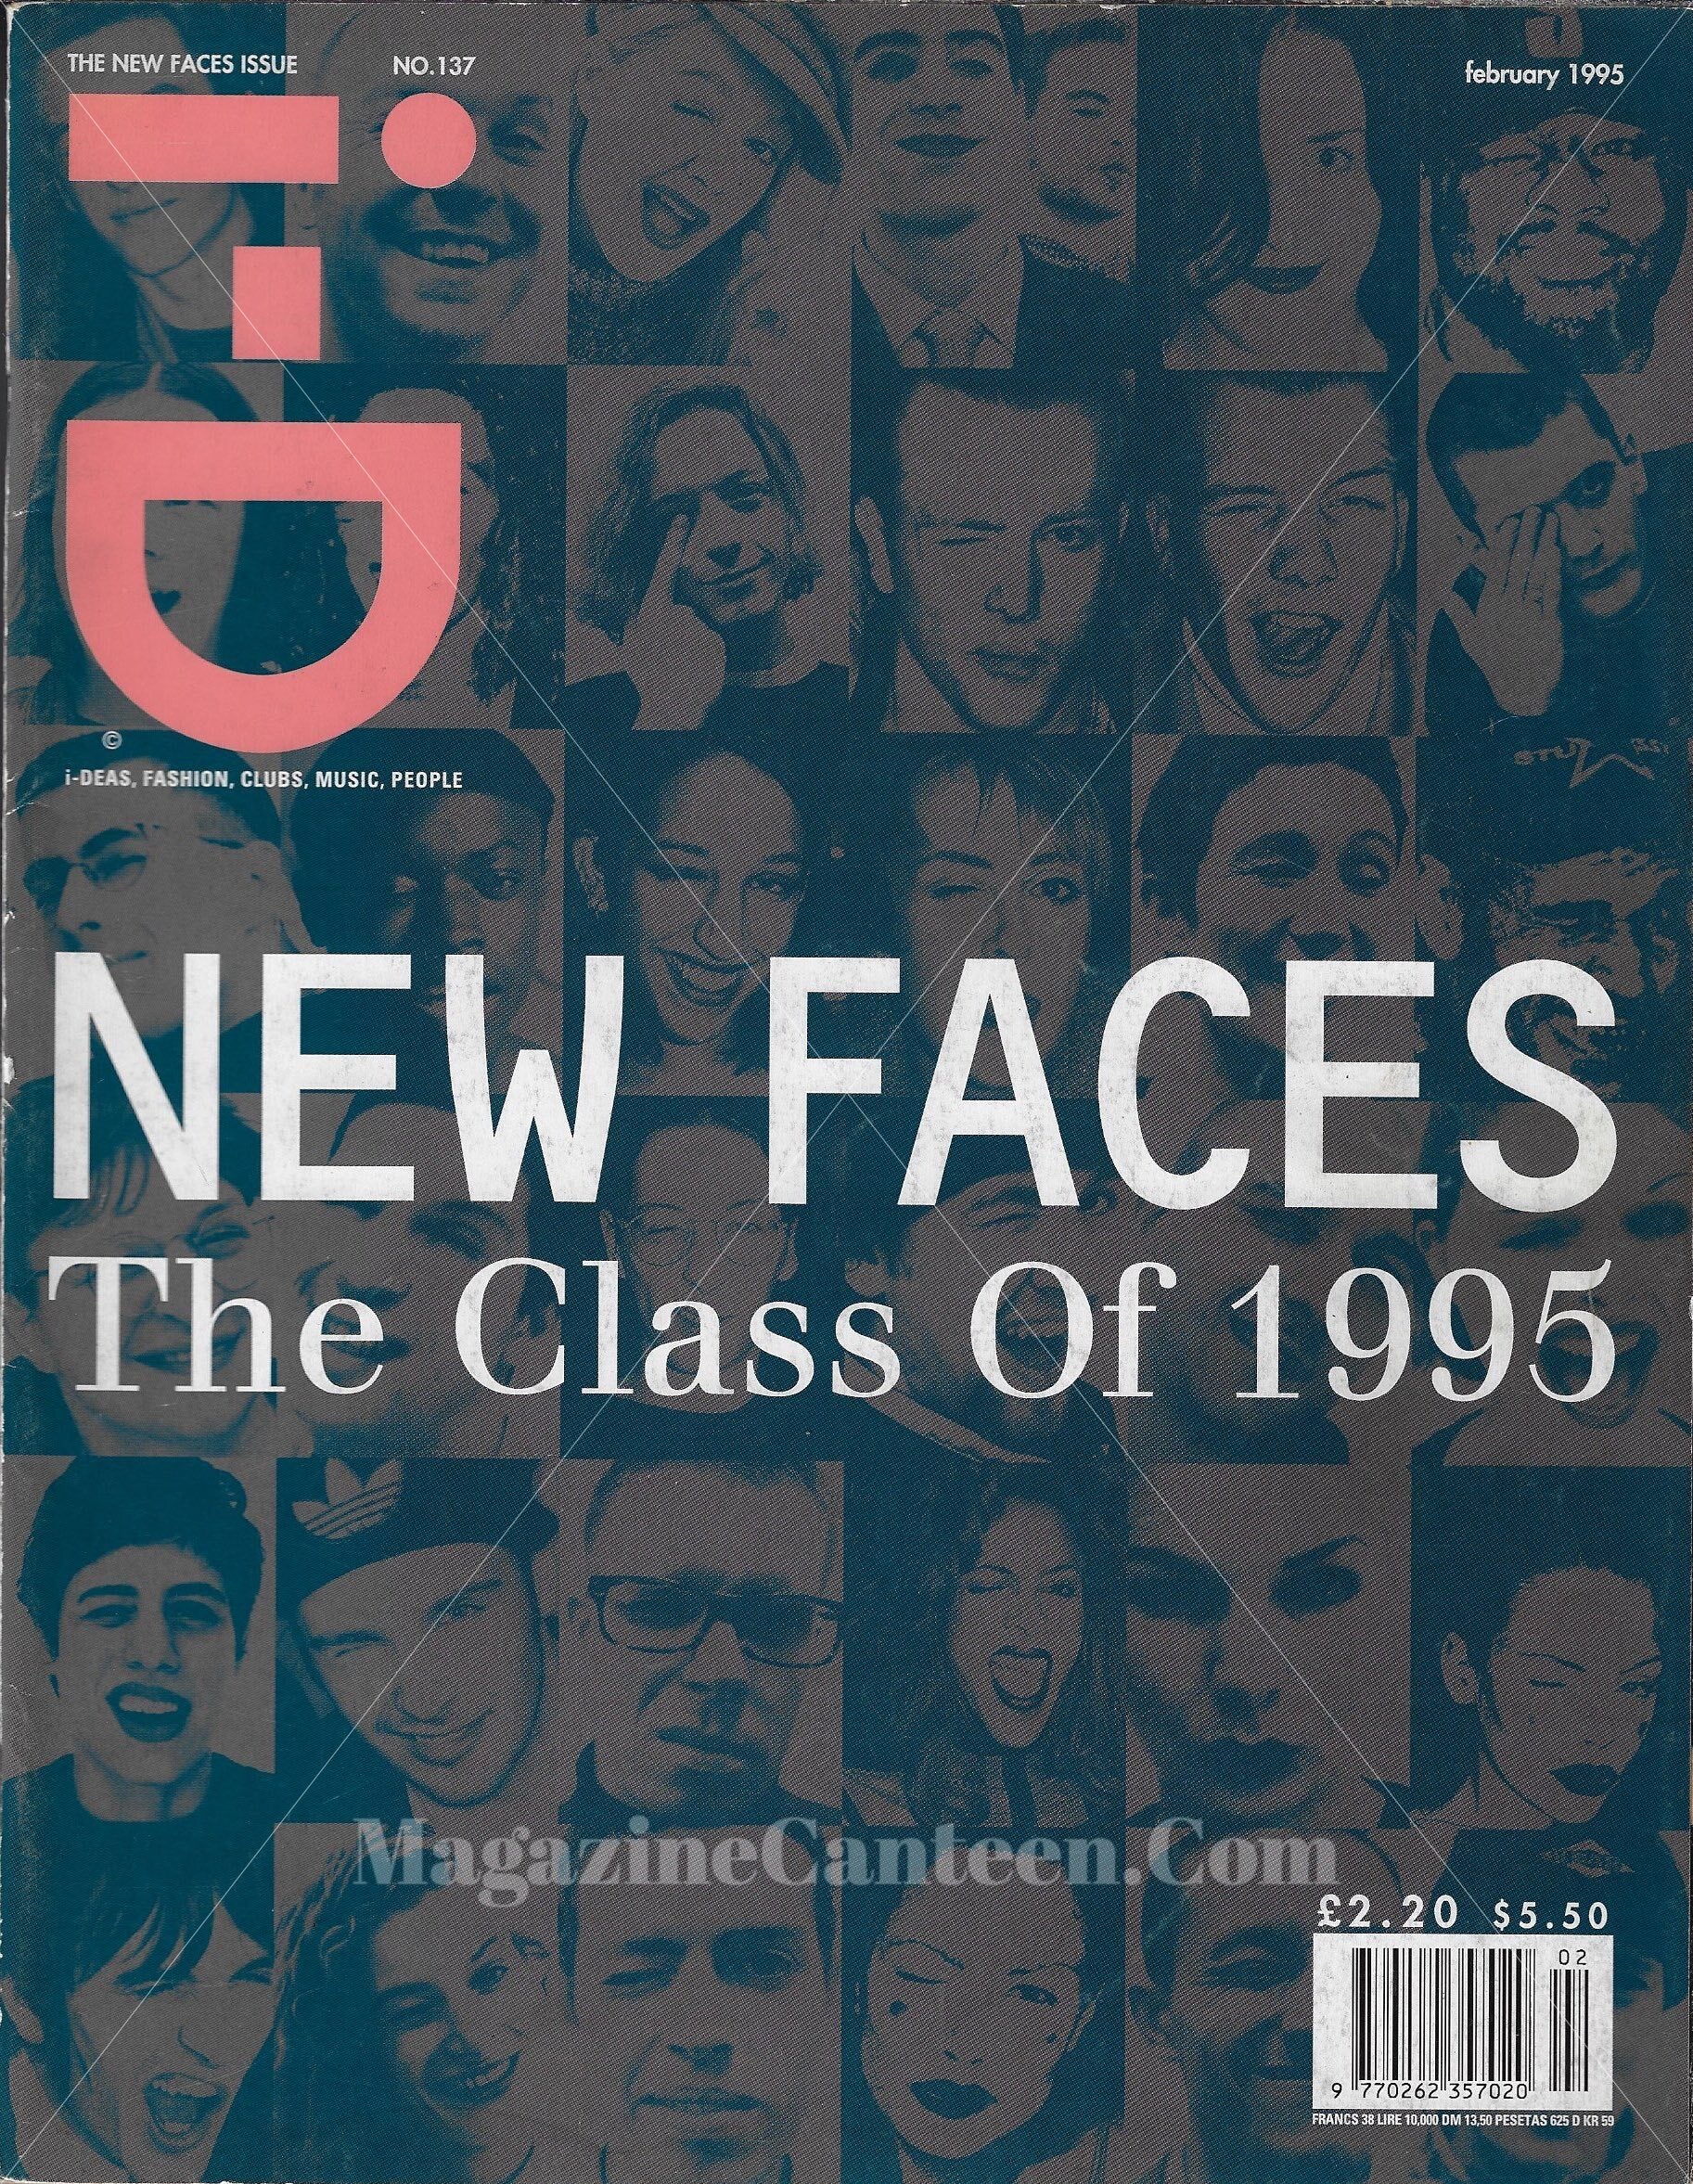 I-D Magazine 137 - The New Faces 1995 kate winslet